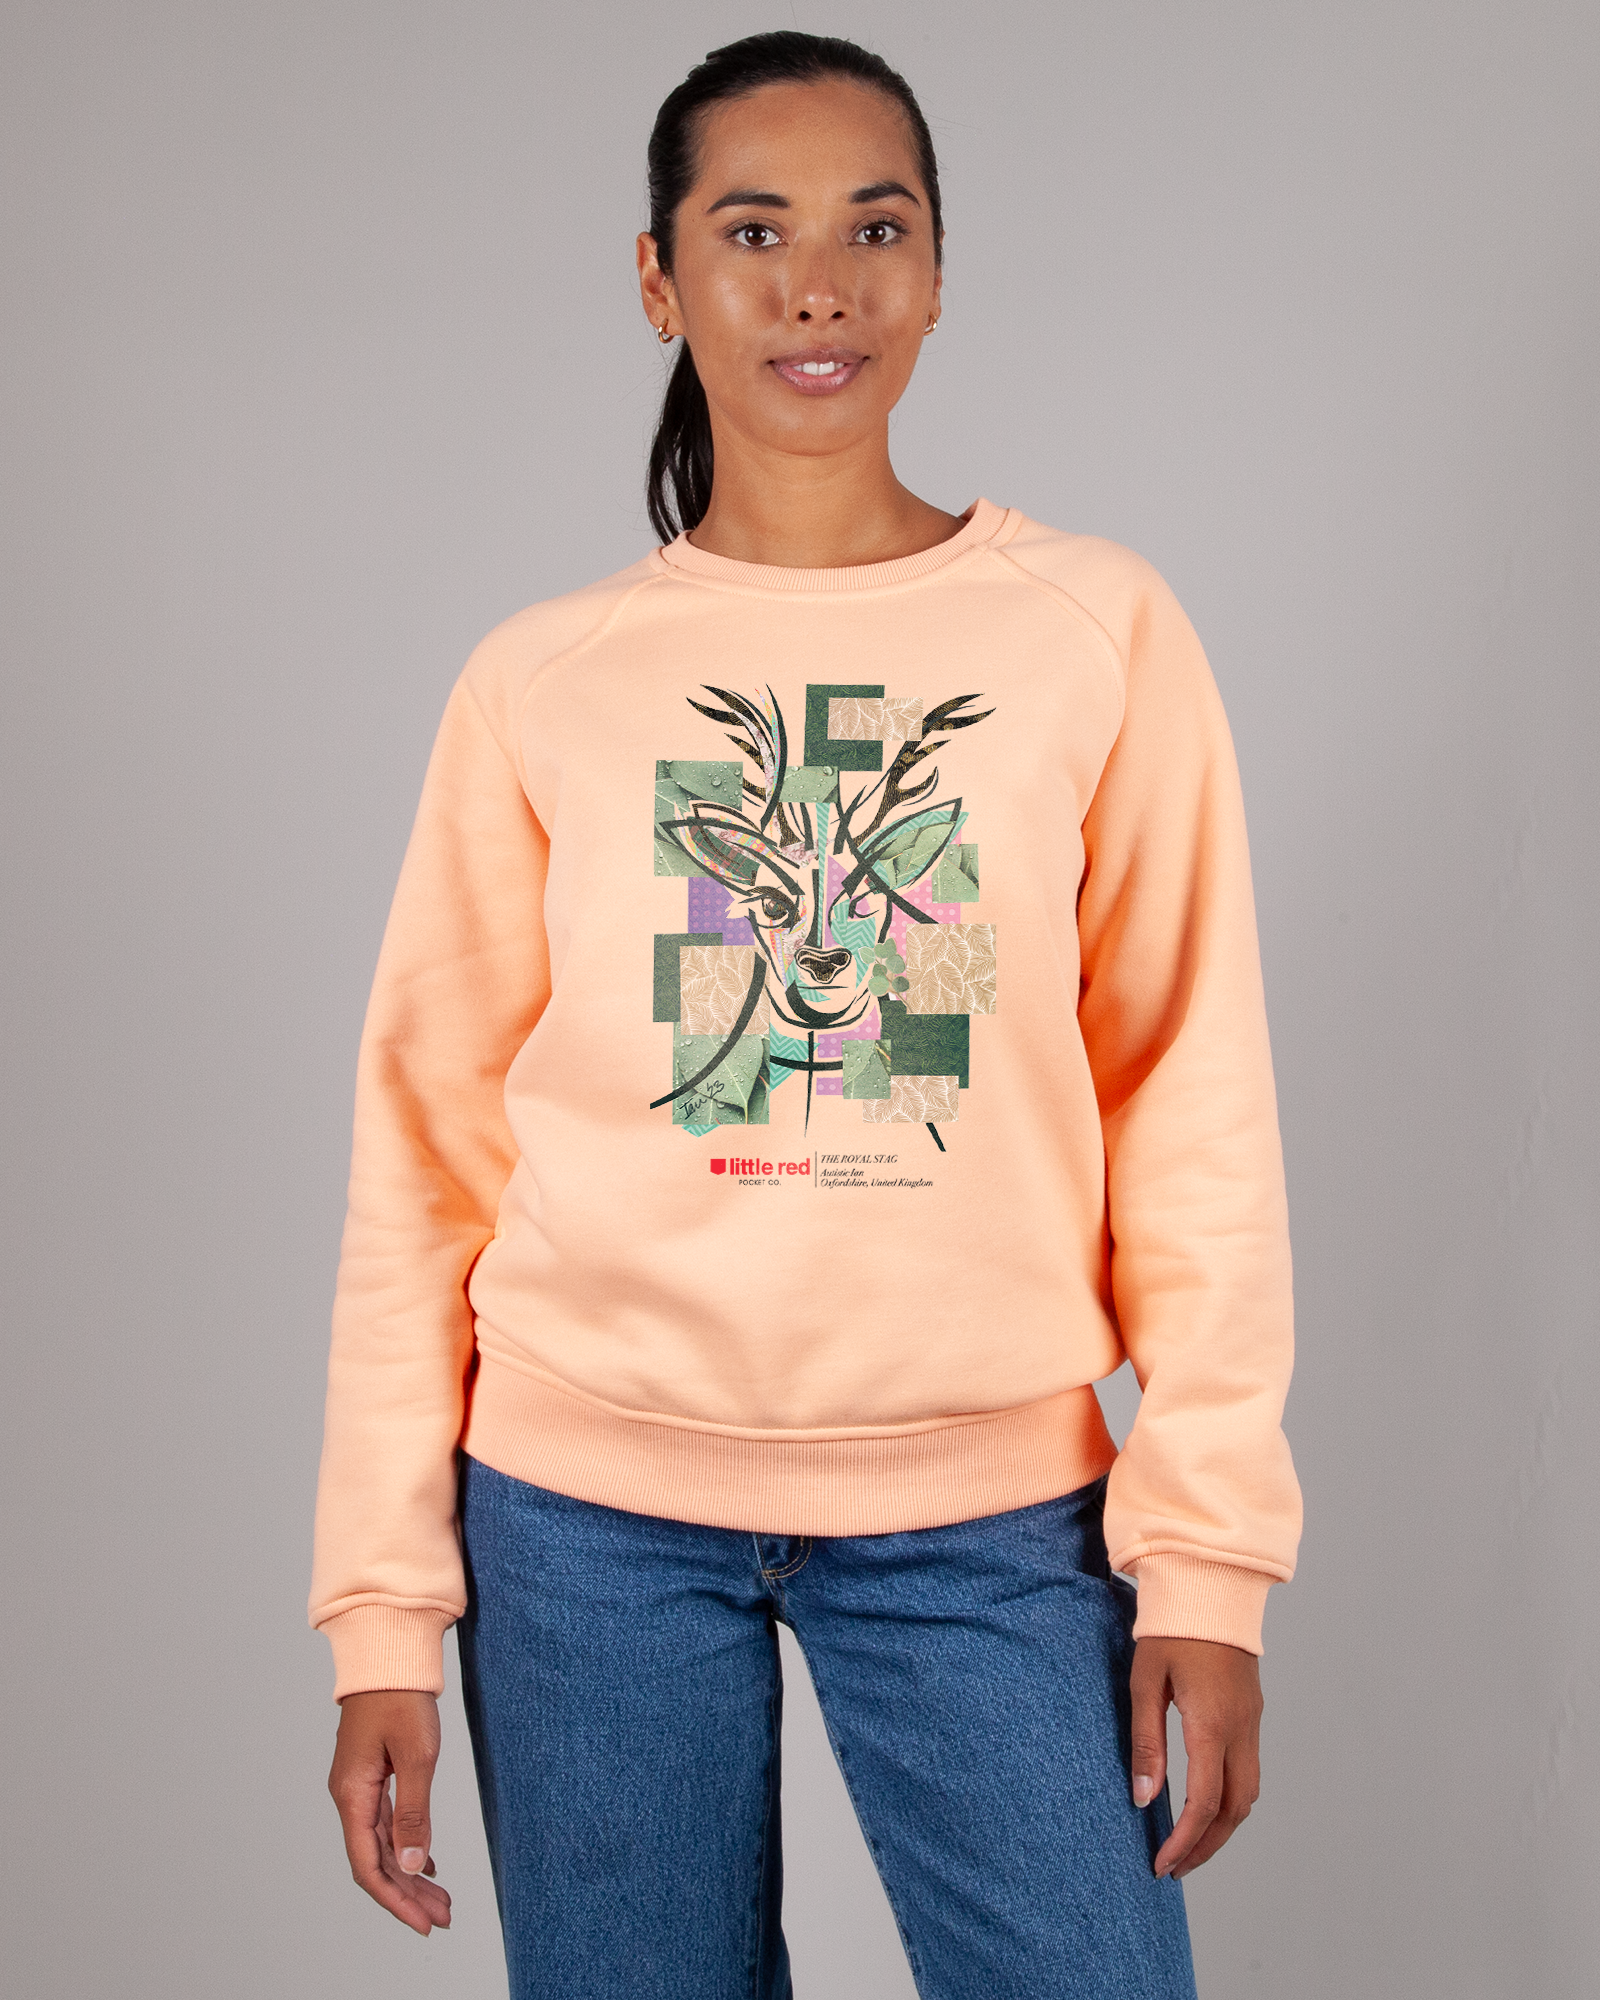 "The Royal Stag" Female Crewneck Sweater